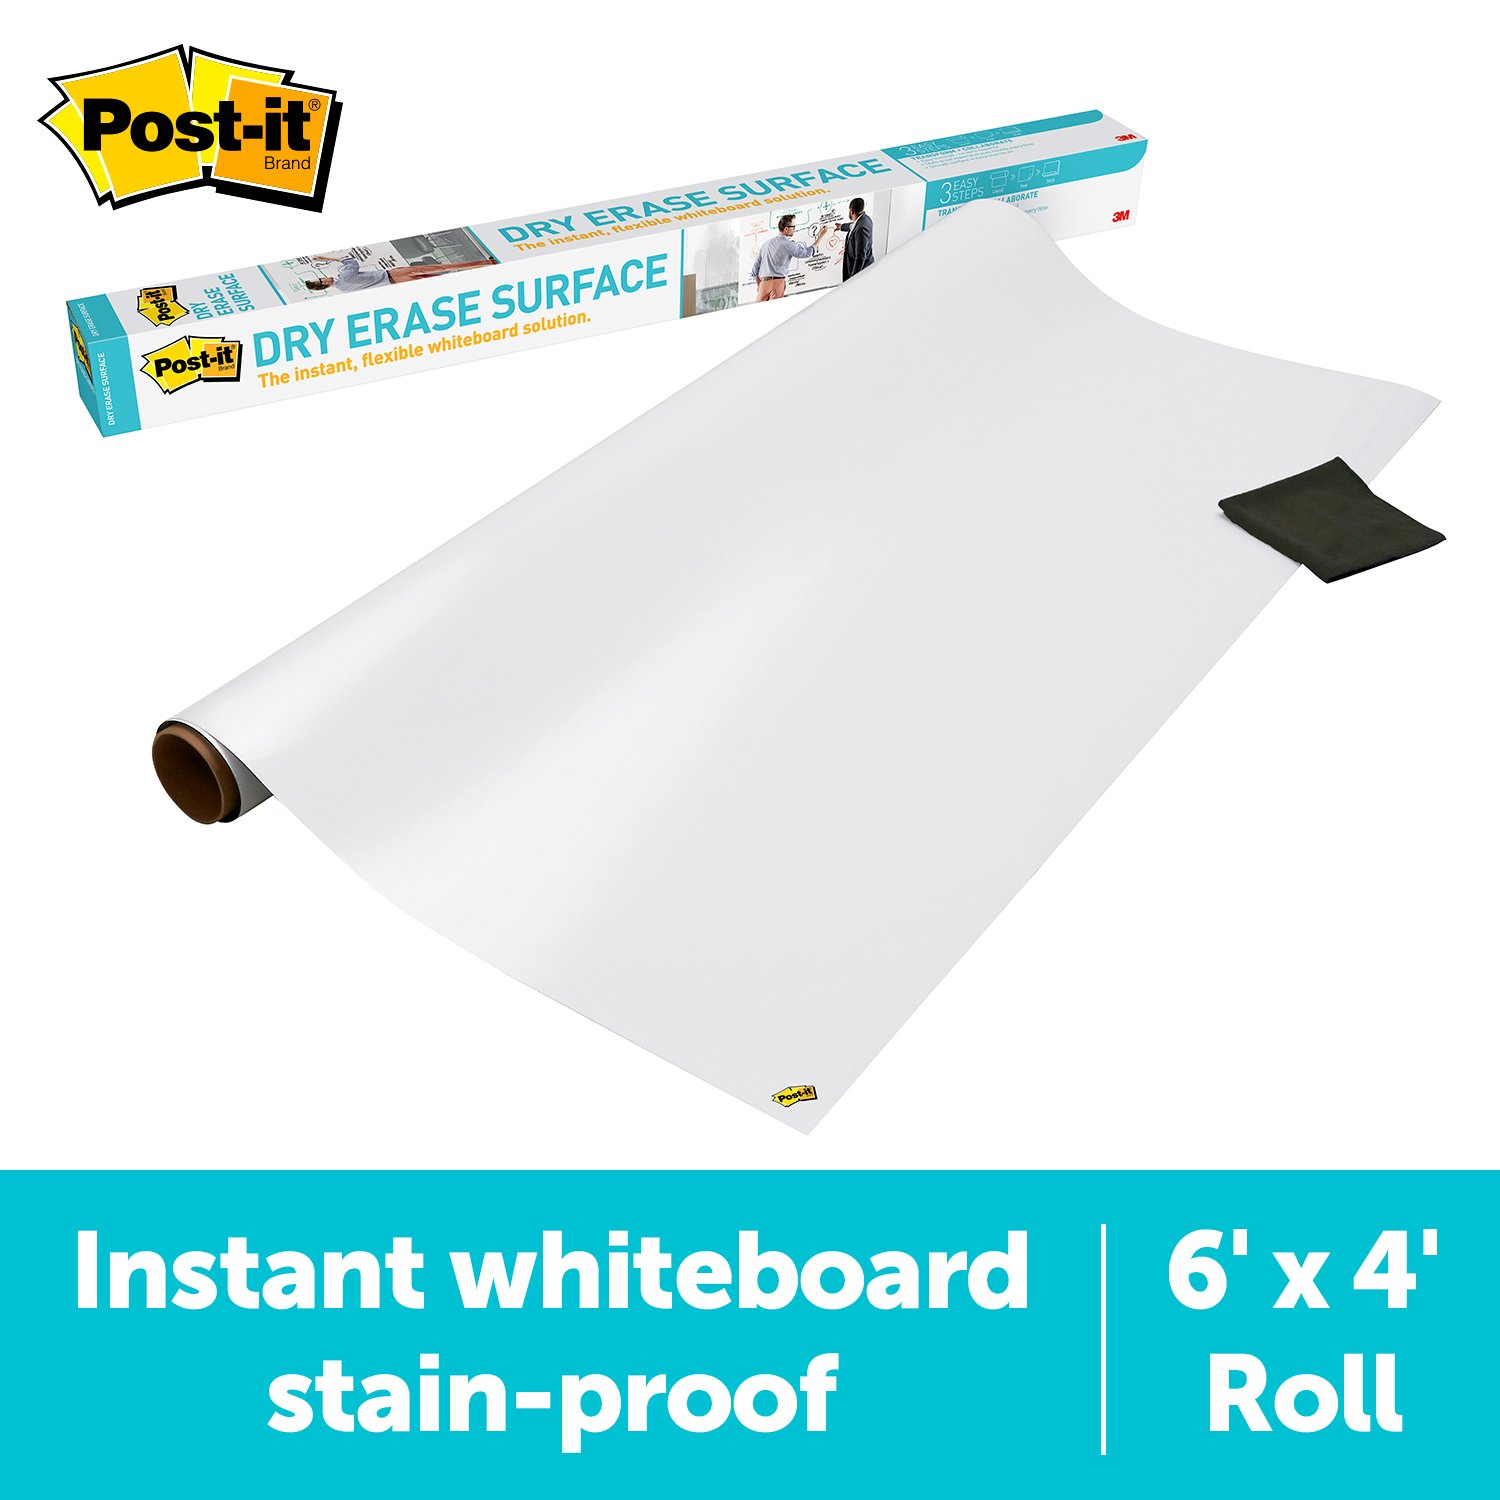 7100220642 - Post-it Dry Erase Surface DEF6x4, 4 ft x 2 yd (1.21 m x 1.82 m)